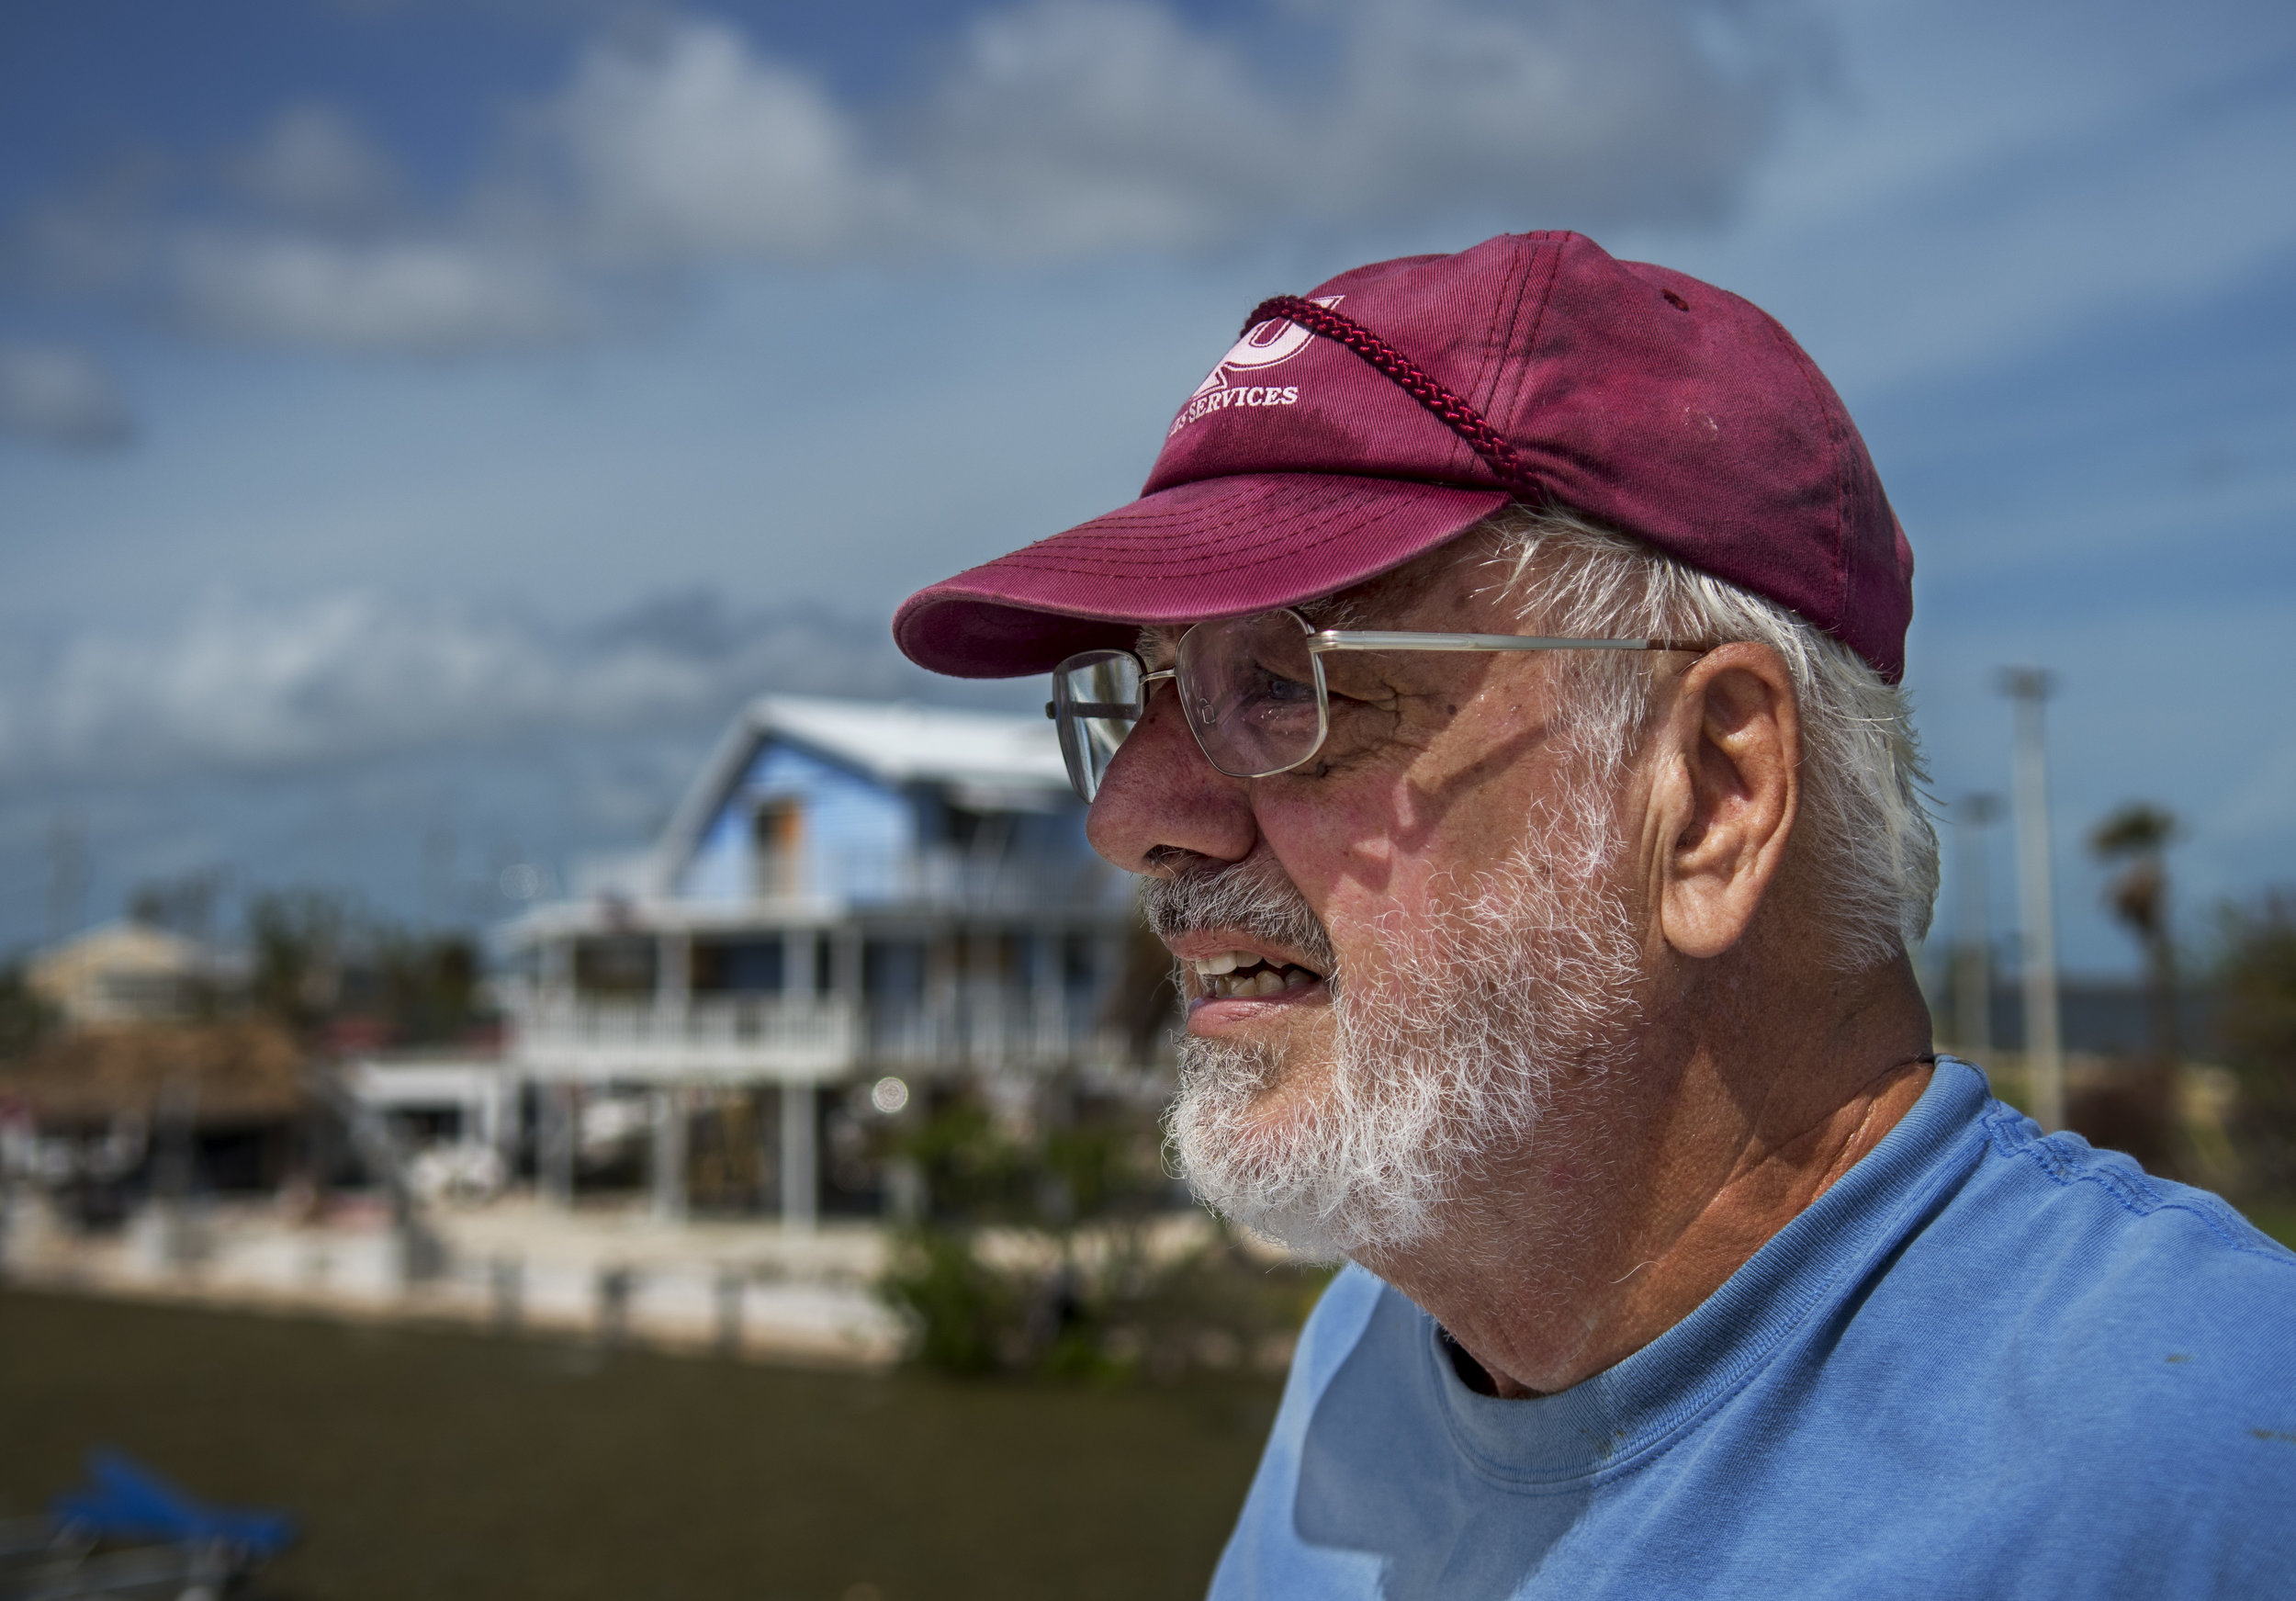  Charlie Chappell is a retiree who lost his home to the destructive force of hurricane Irma. Flood waters ripped out the bottom floor of his house on Big Pine Key and the winds took the top floor walls and ceiling. His roof was found two houses over 